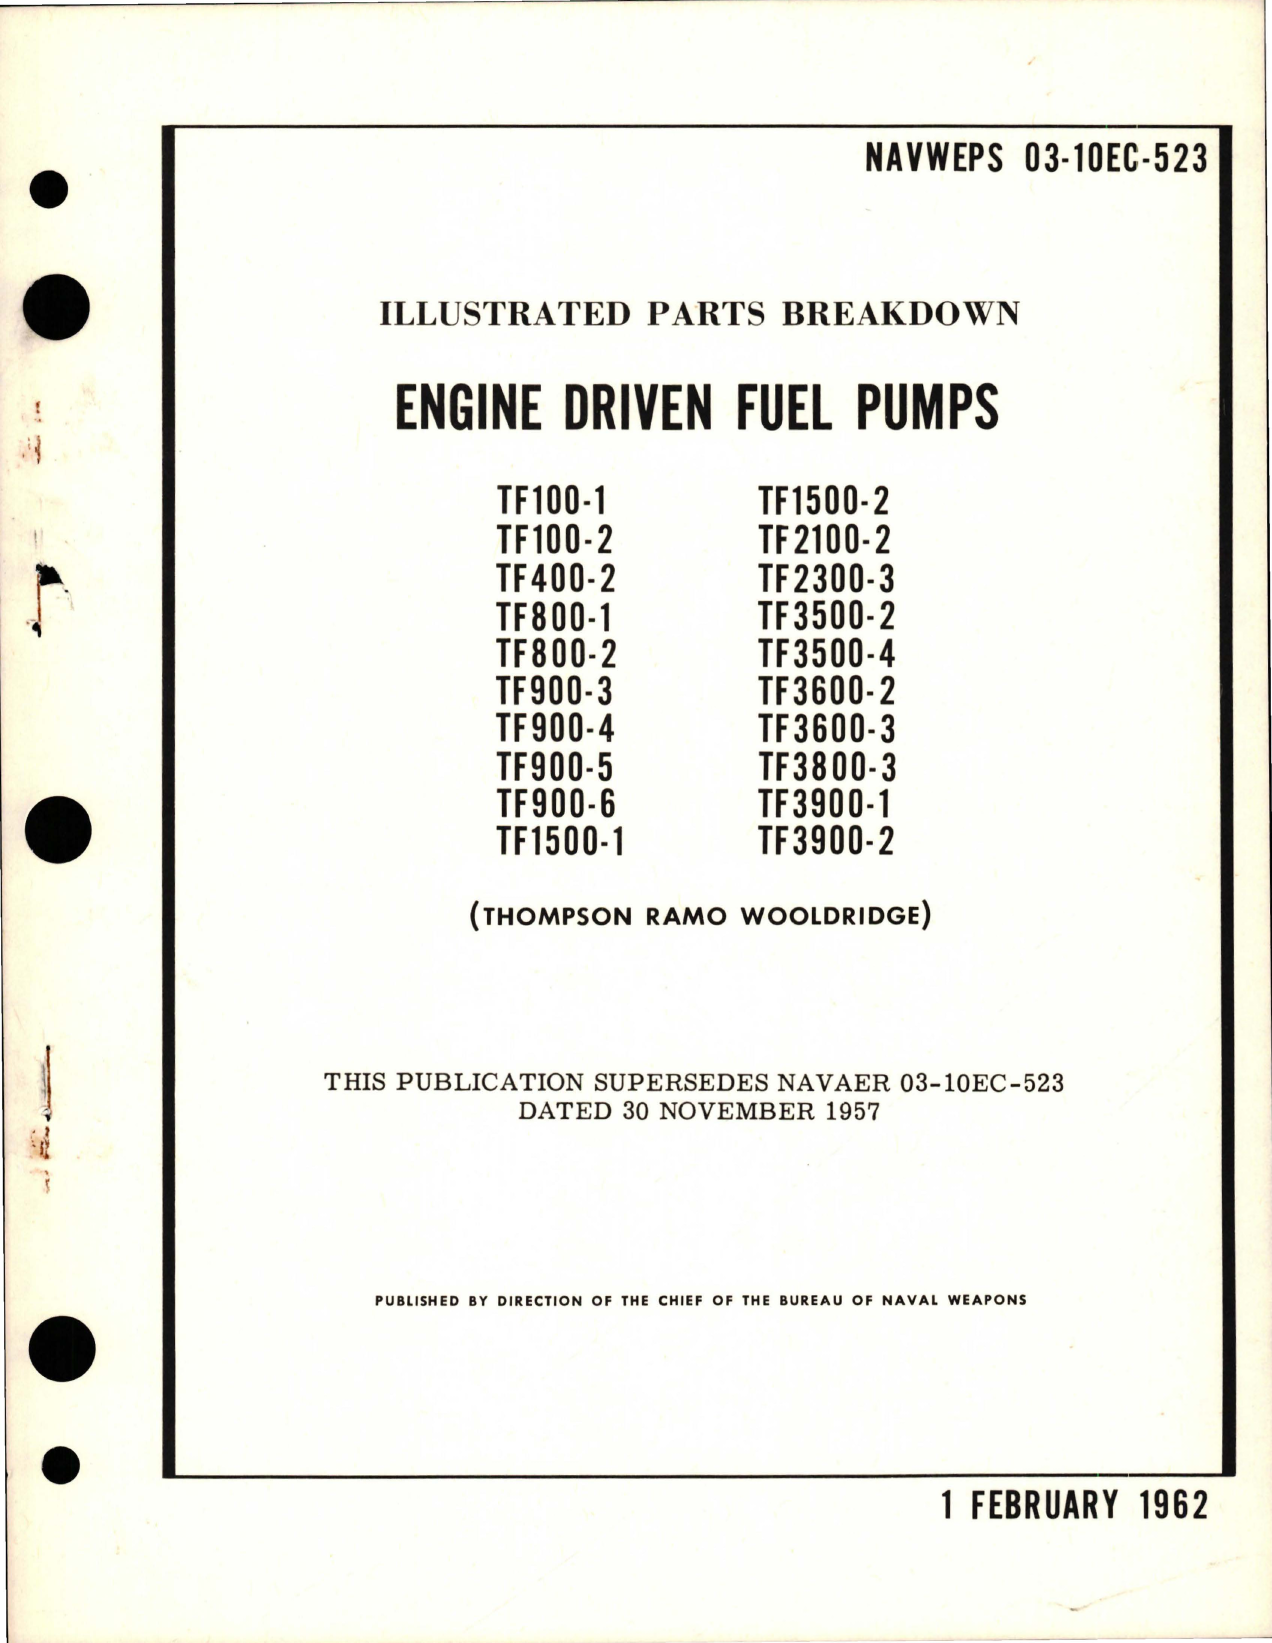 Sample page 1 from AirCorps Library document: Illustrated Parts Breakdown for Engine Driven Fuel Pumps